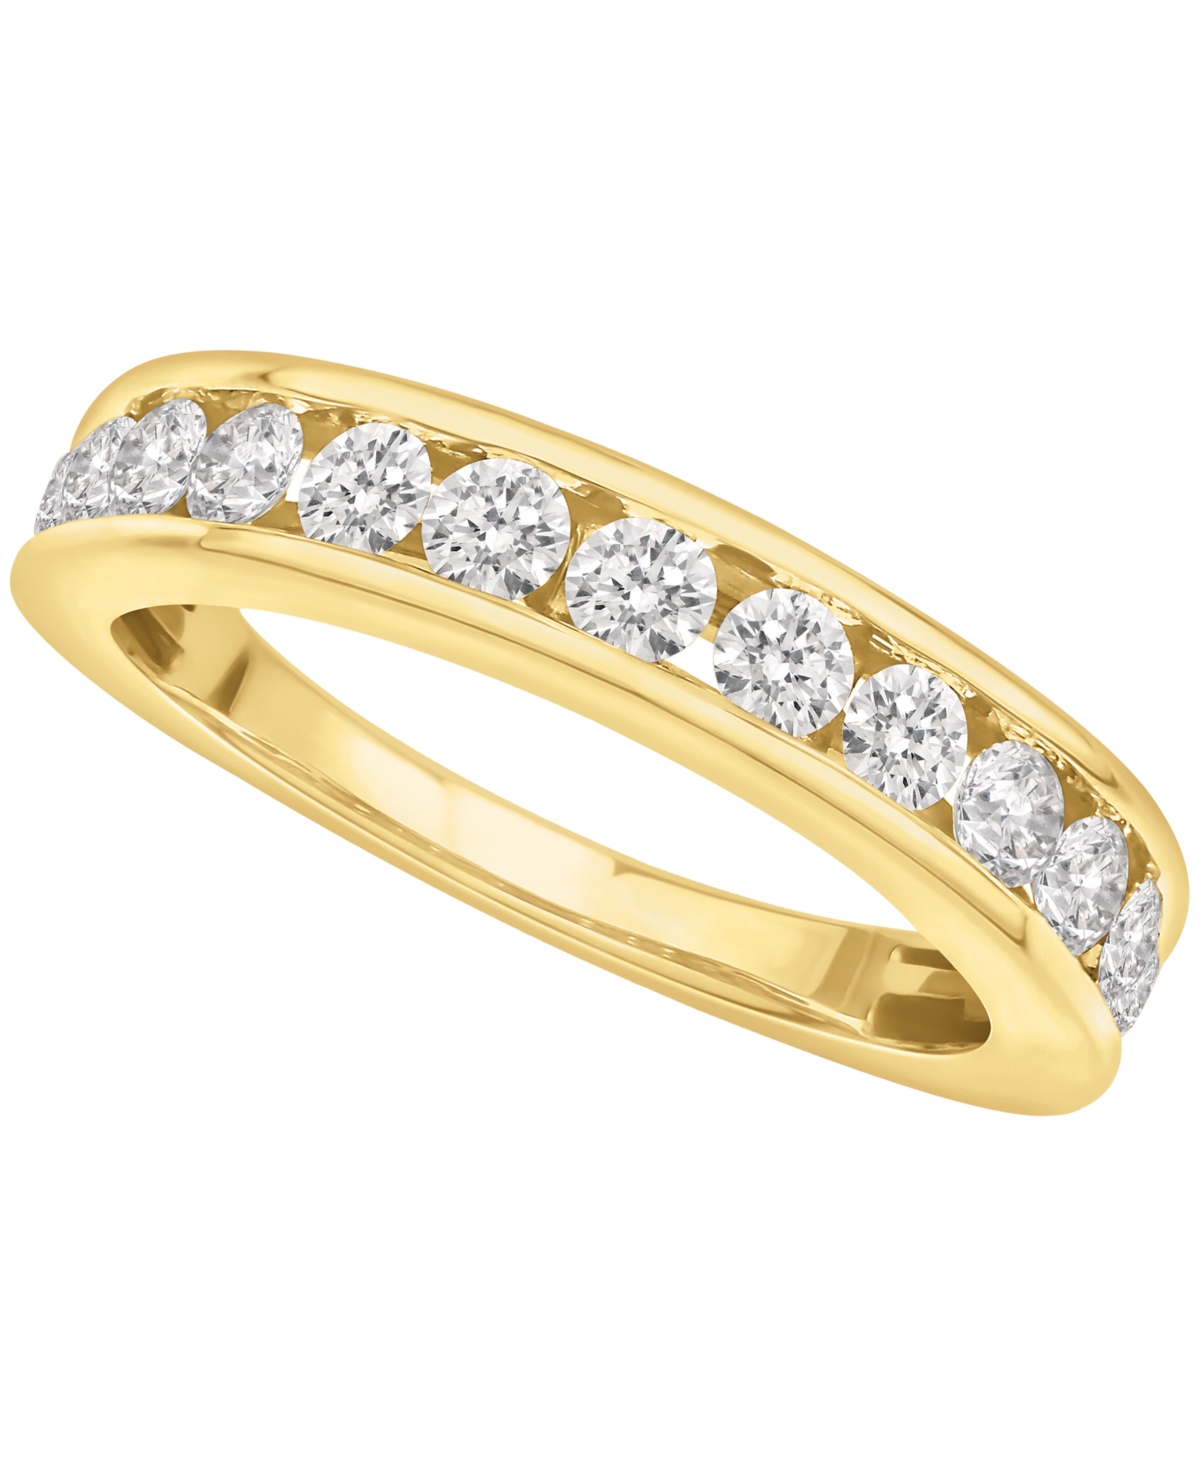 Certified Diamond Channel Band (2 ct. t.w.) in 14K White Gold or Yellow Gold - Yellow Gold